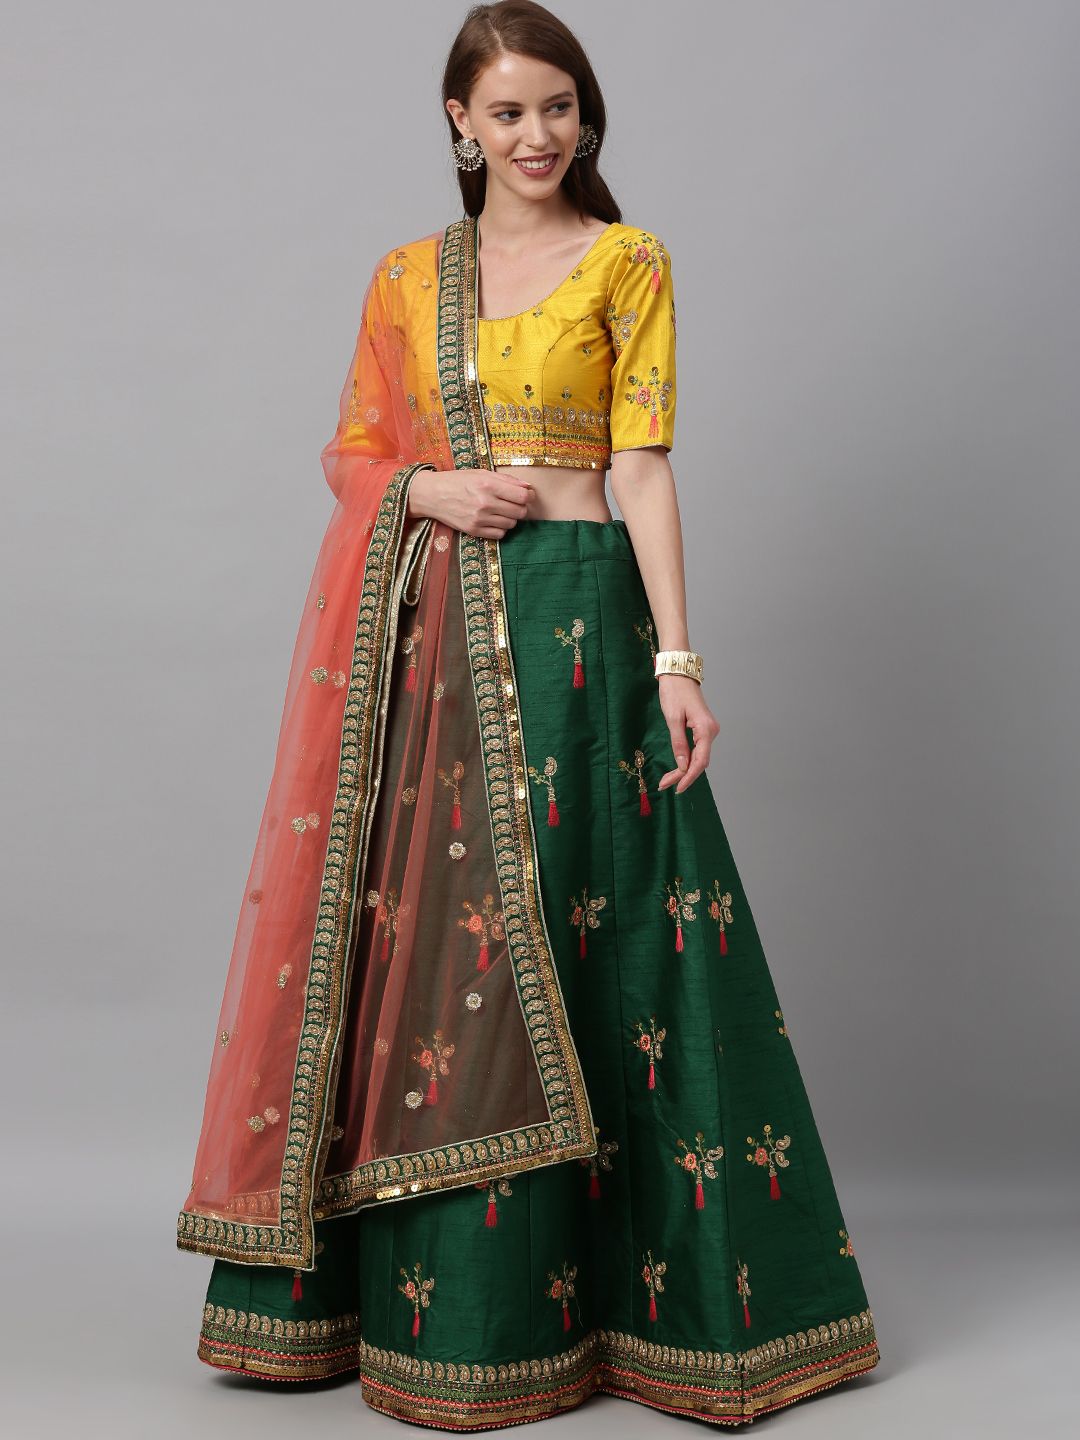 panchhi Green & Yellow Embellished Semi-Stitched Lehenga & Unstitched Blouse with Dupatta Price in India